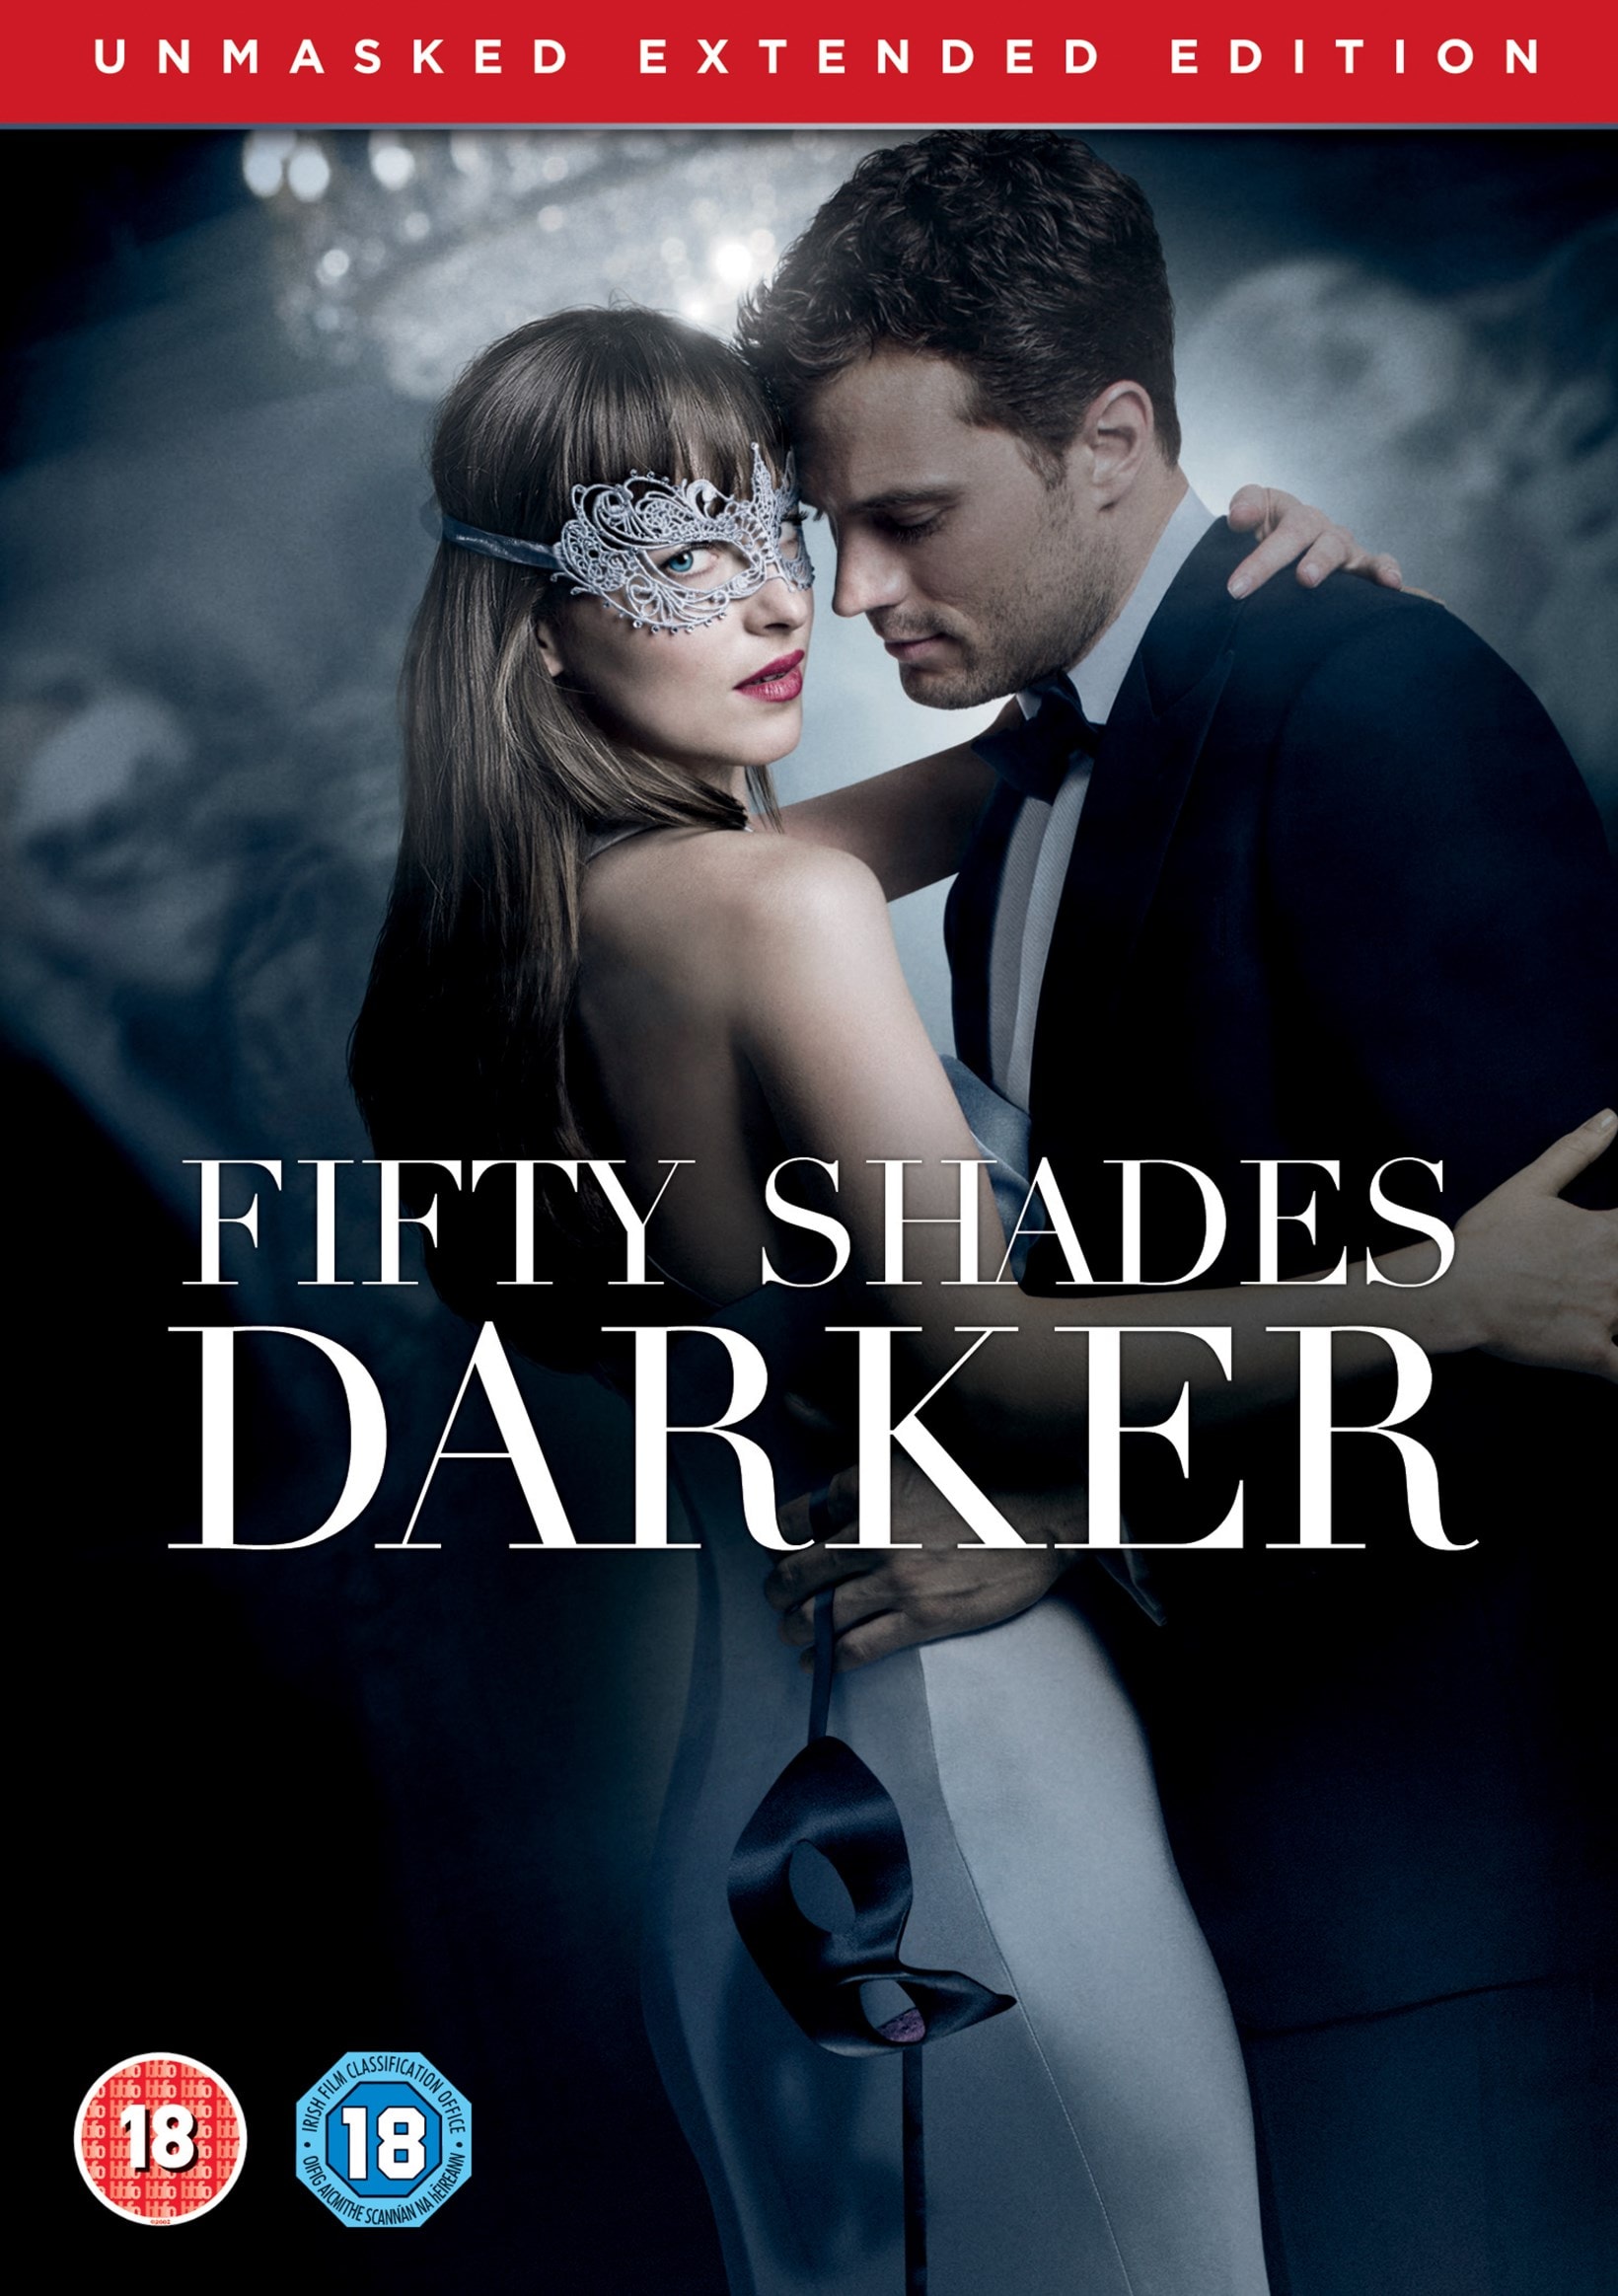 Fifty Shades Darker - The Unmasked Extended Edition